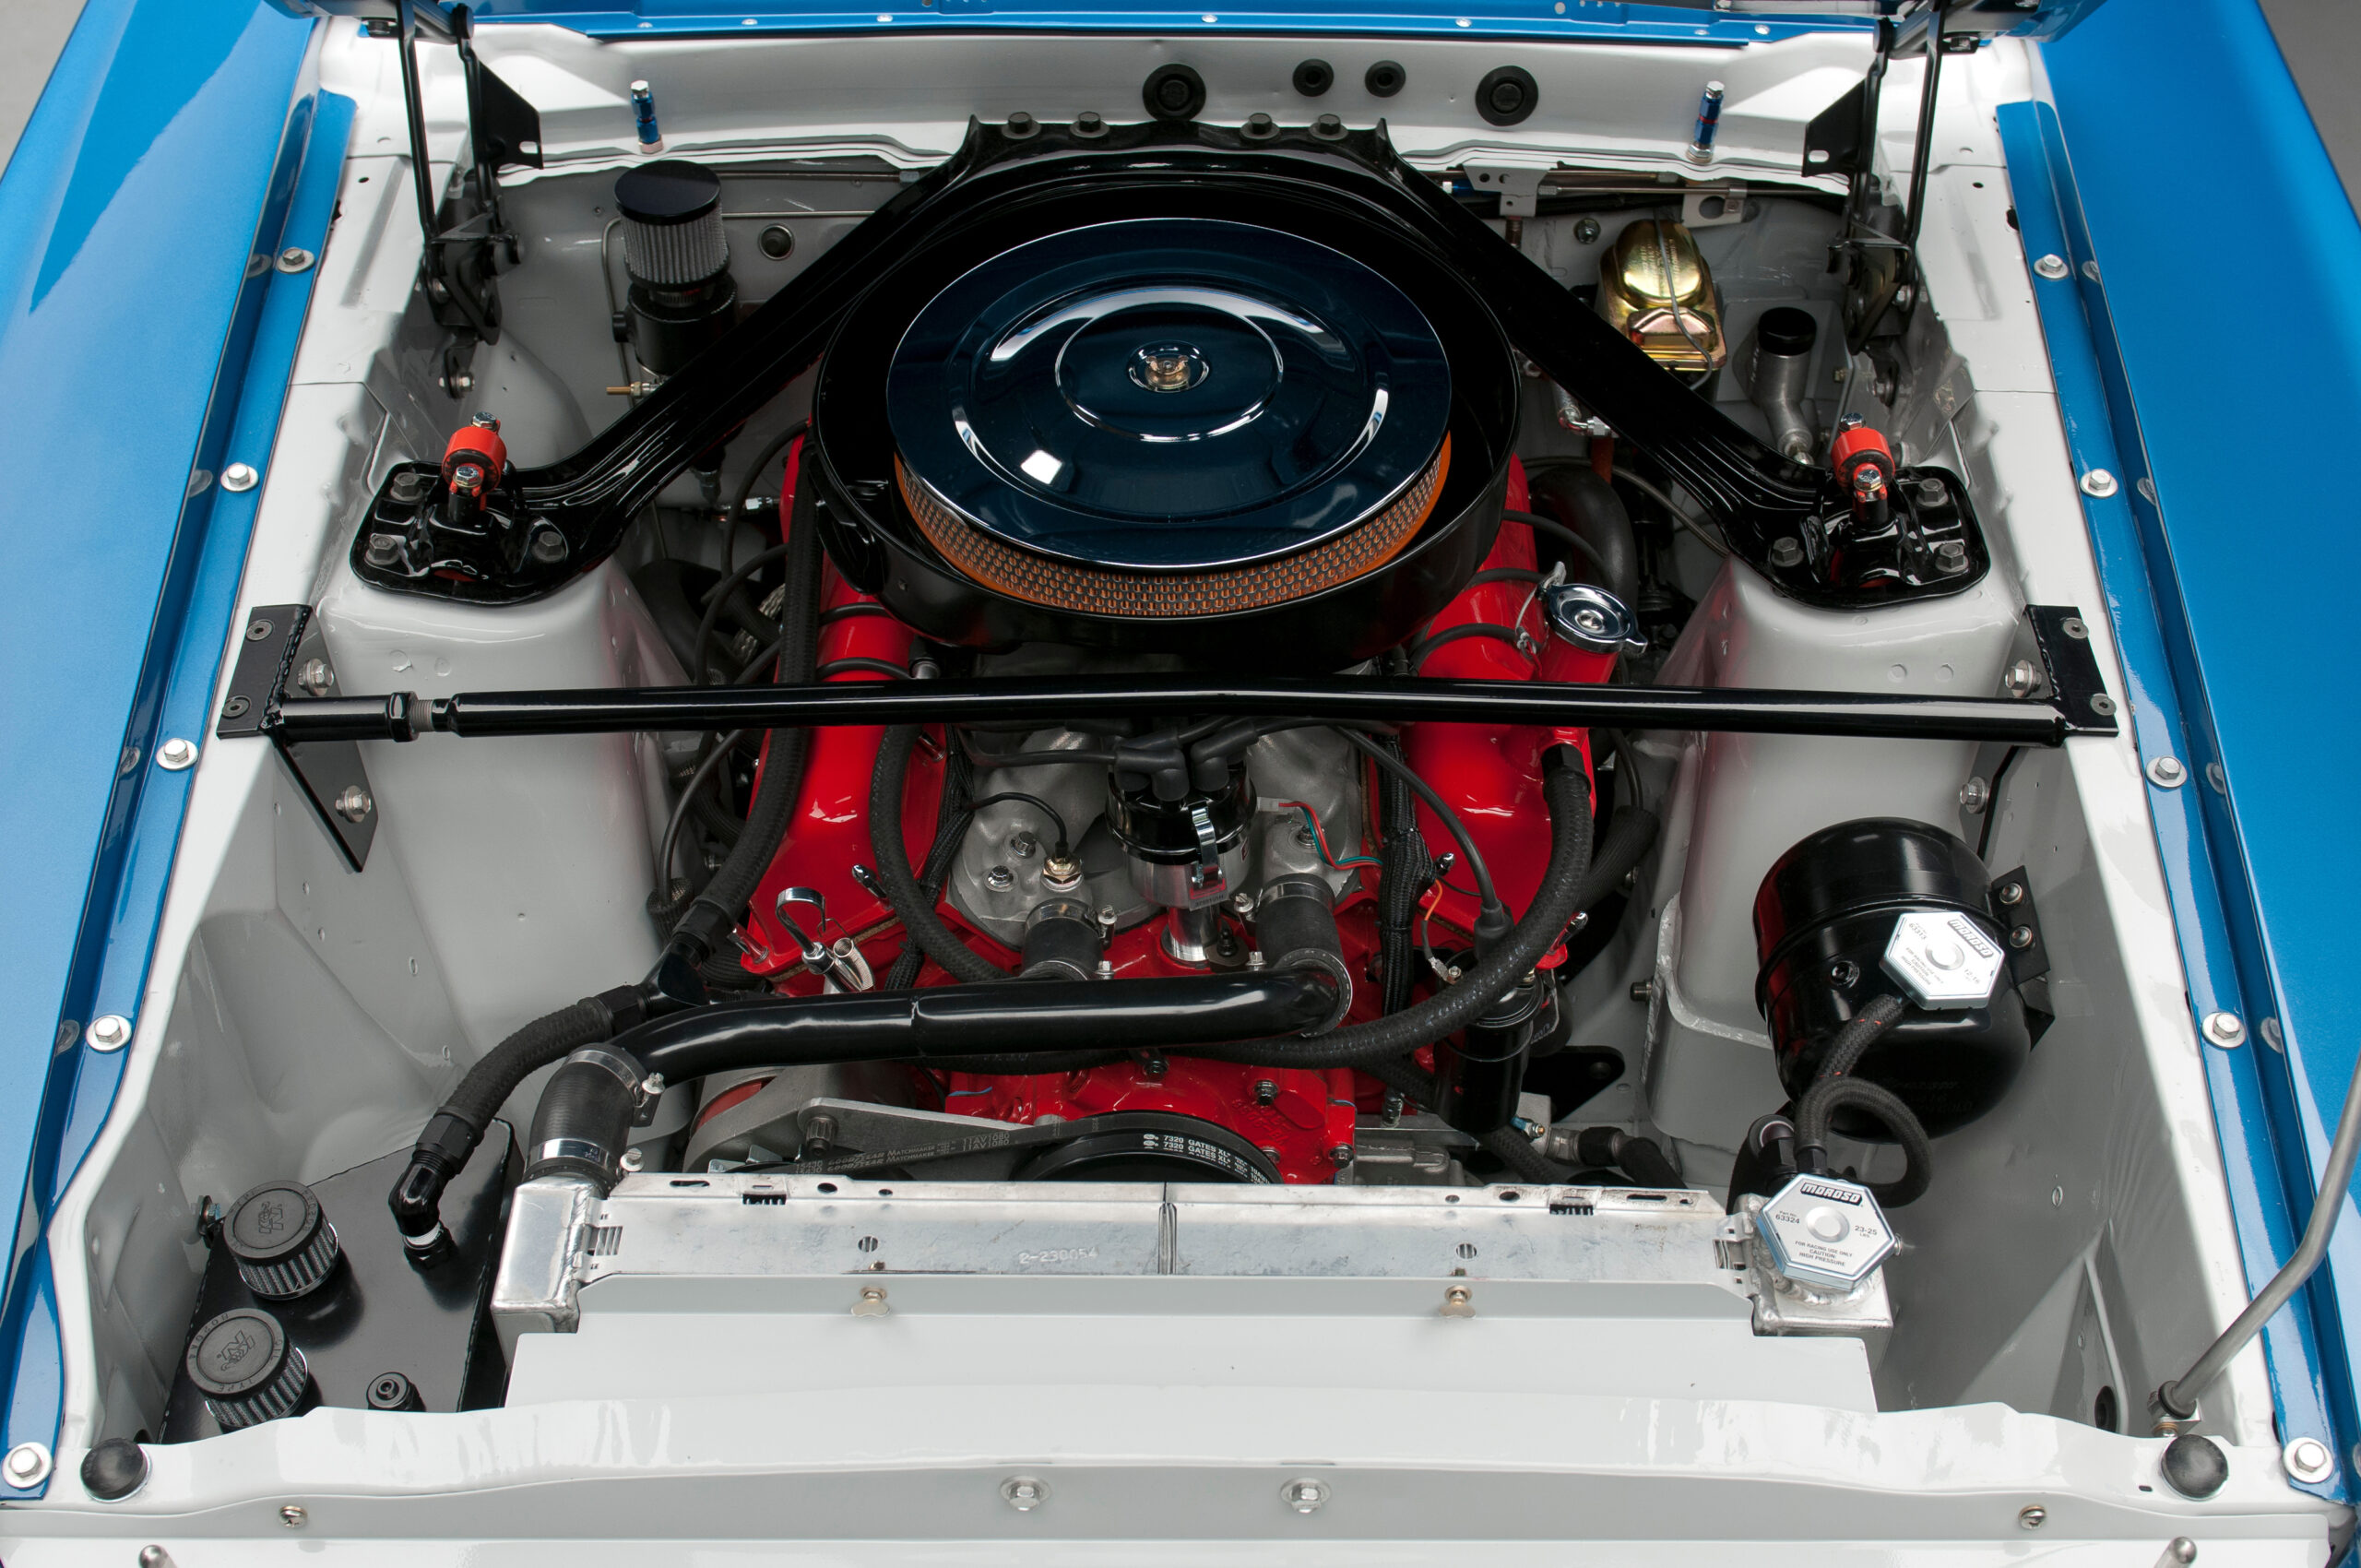 Photo of the 1969 Shelby GT350's engine